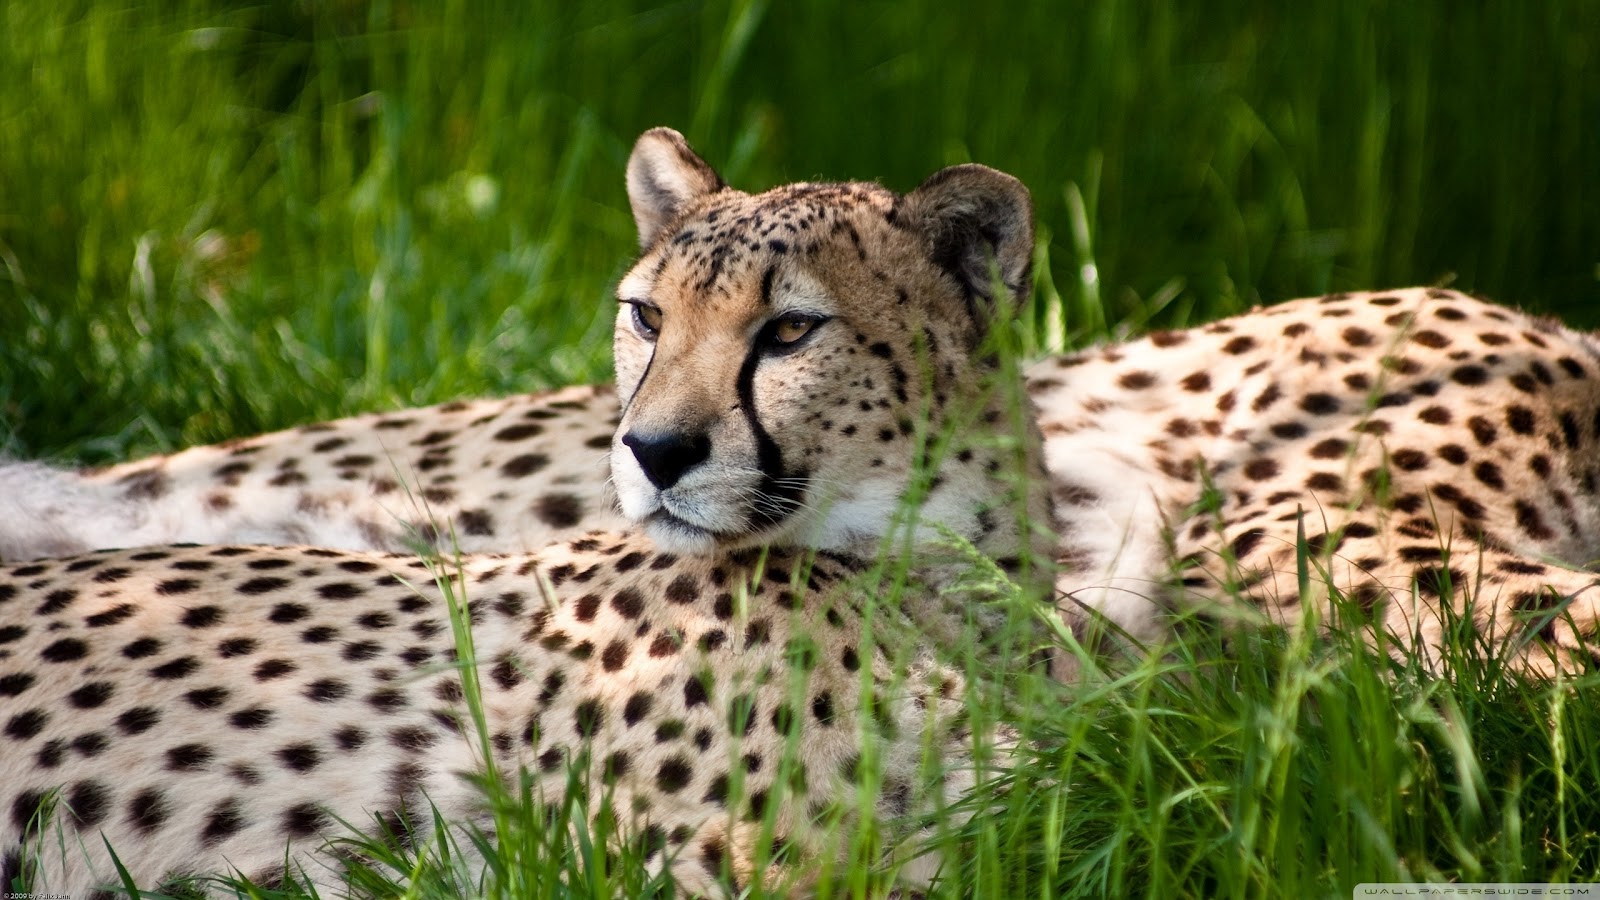 Cheetah Wallpaper Full HD High Definition Pictures For